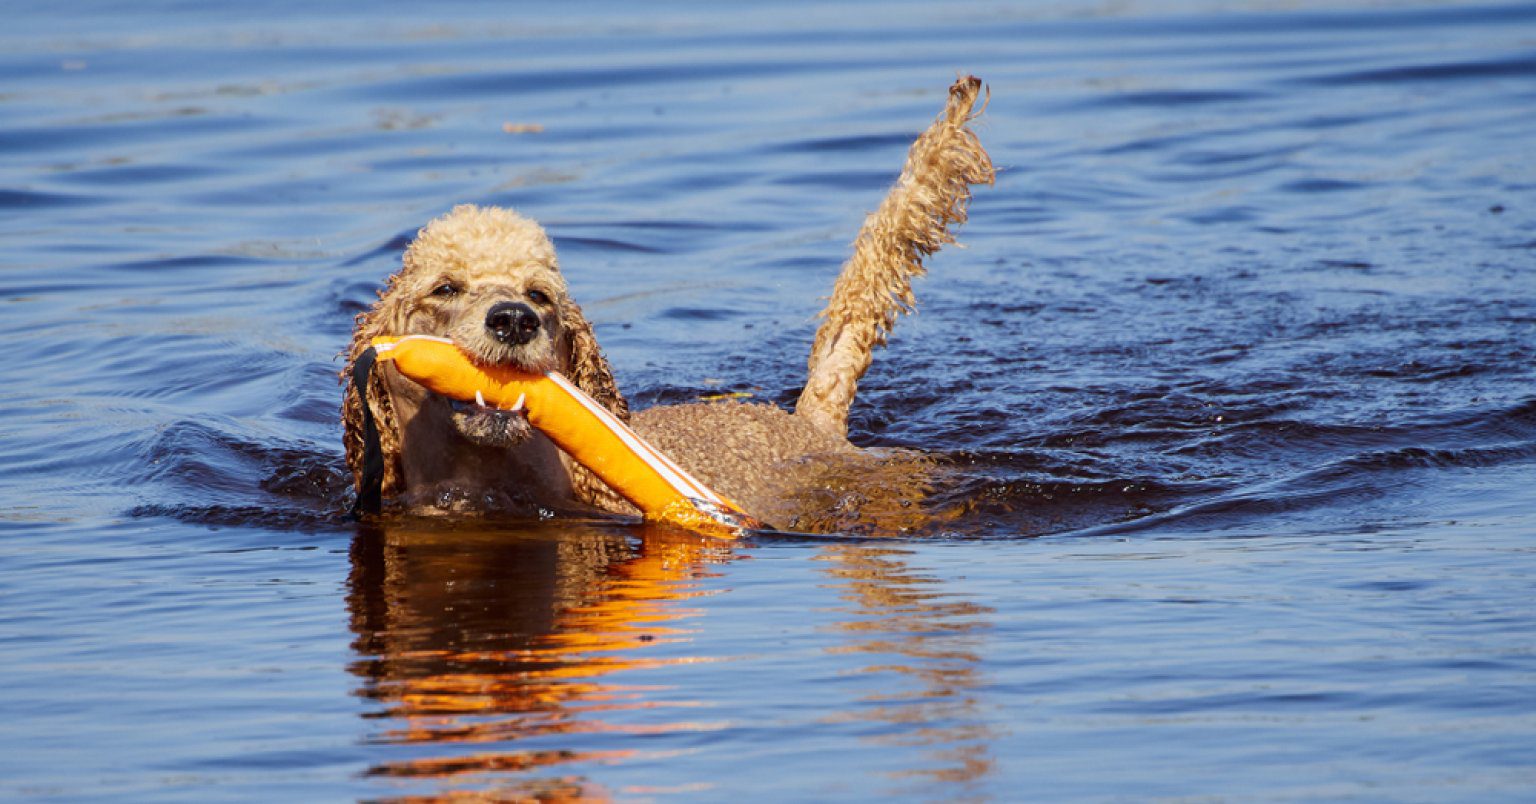 Photograph of a poodle swimming in a lake